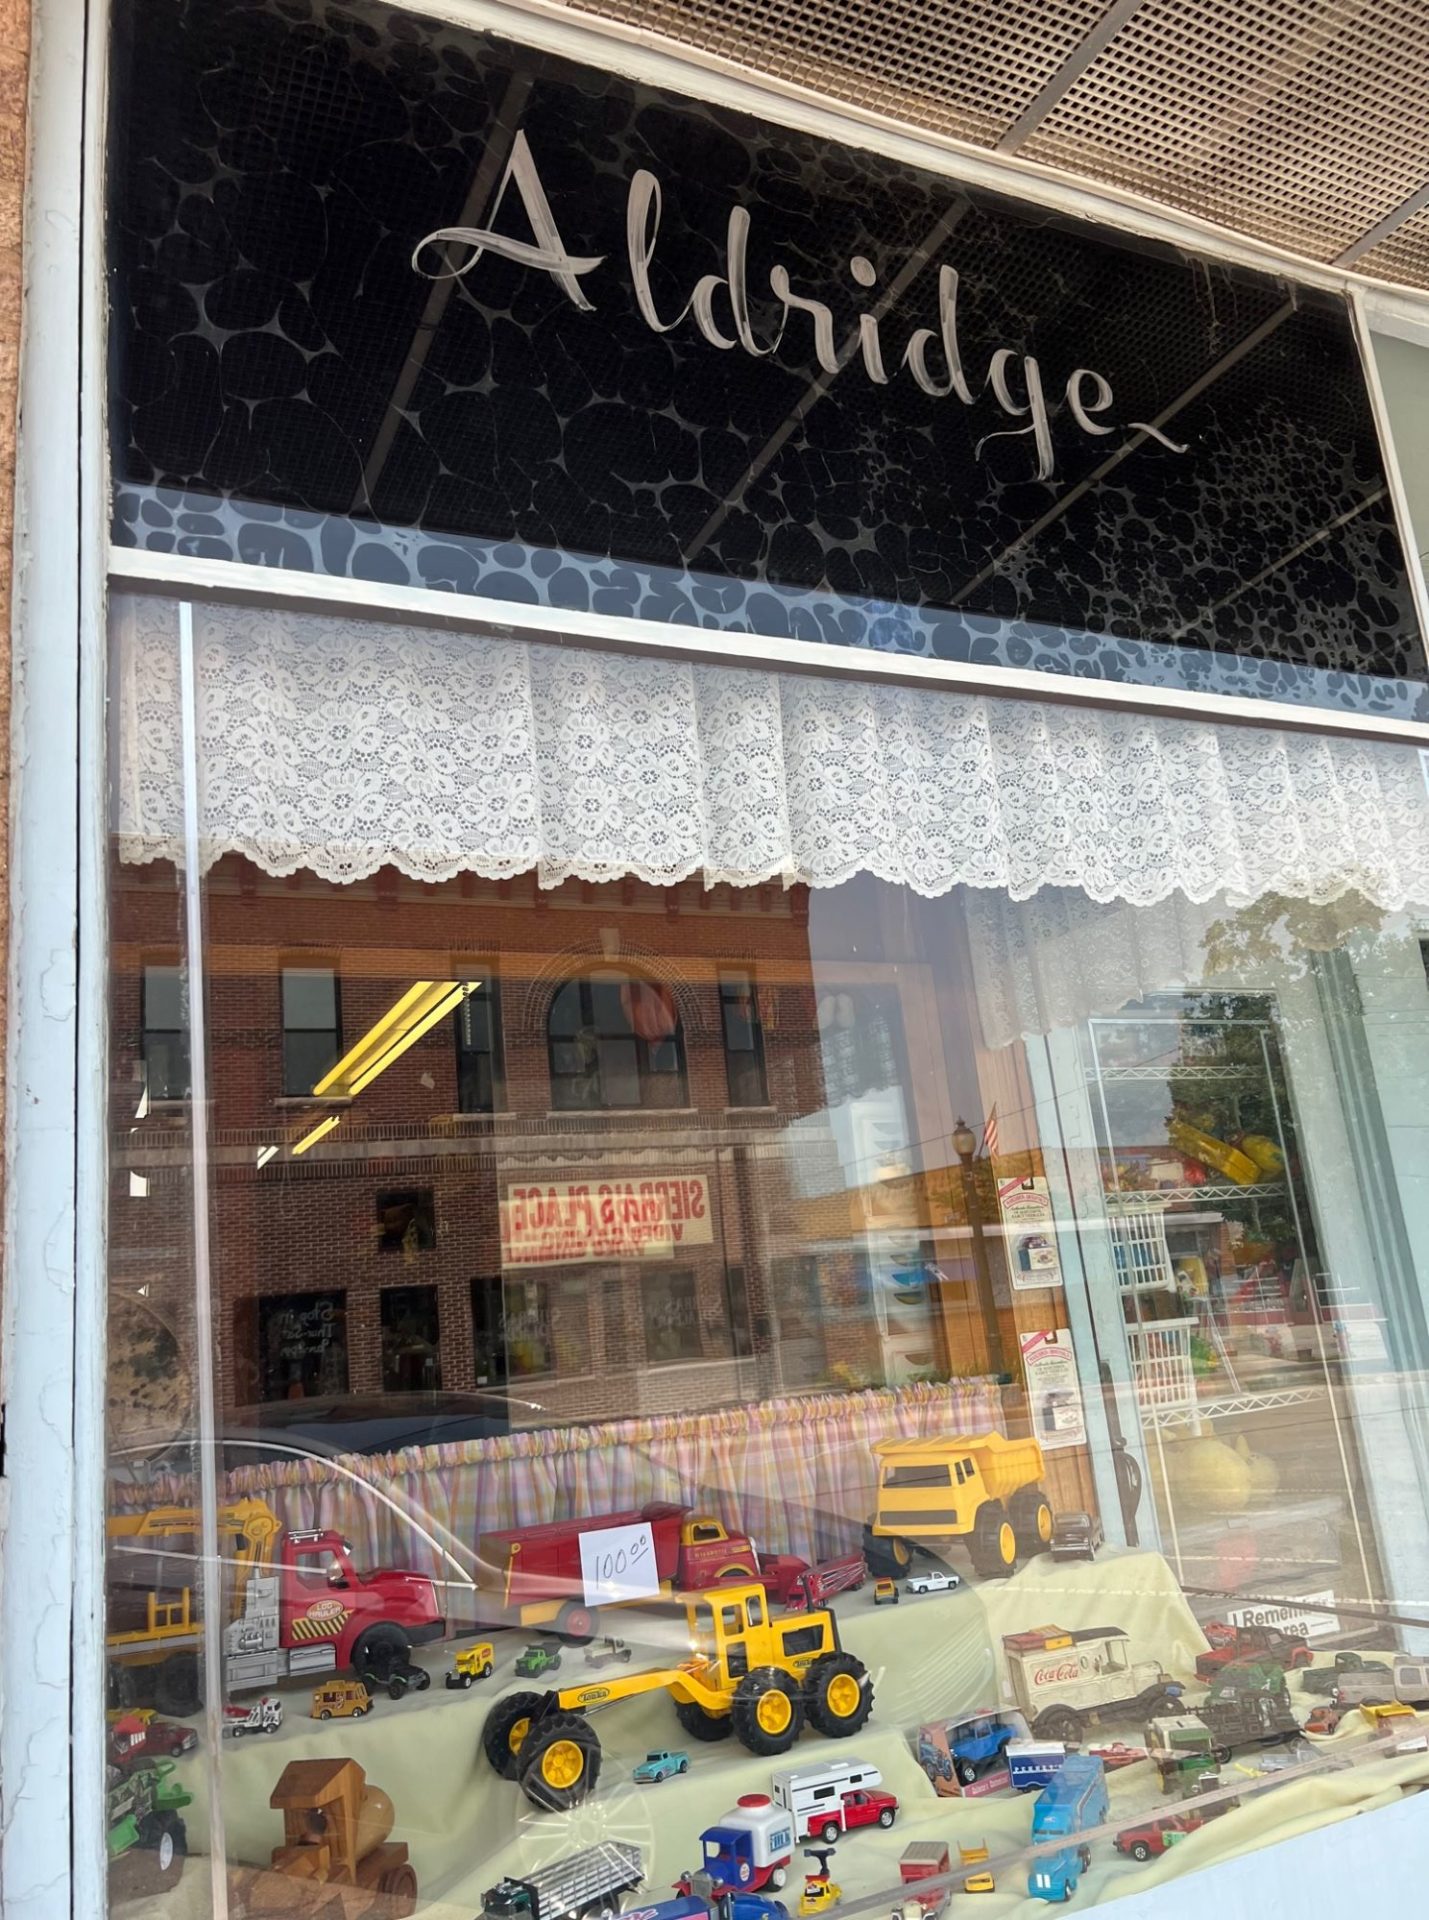 A store window with a display filled with toy trucks of all sizes. Above the window is a black sign with the word Aldridge in white script.